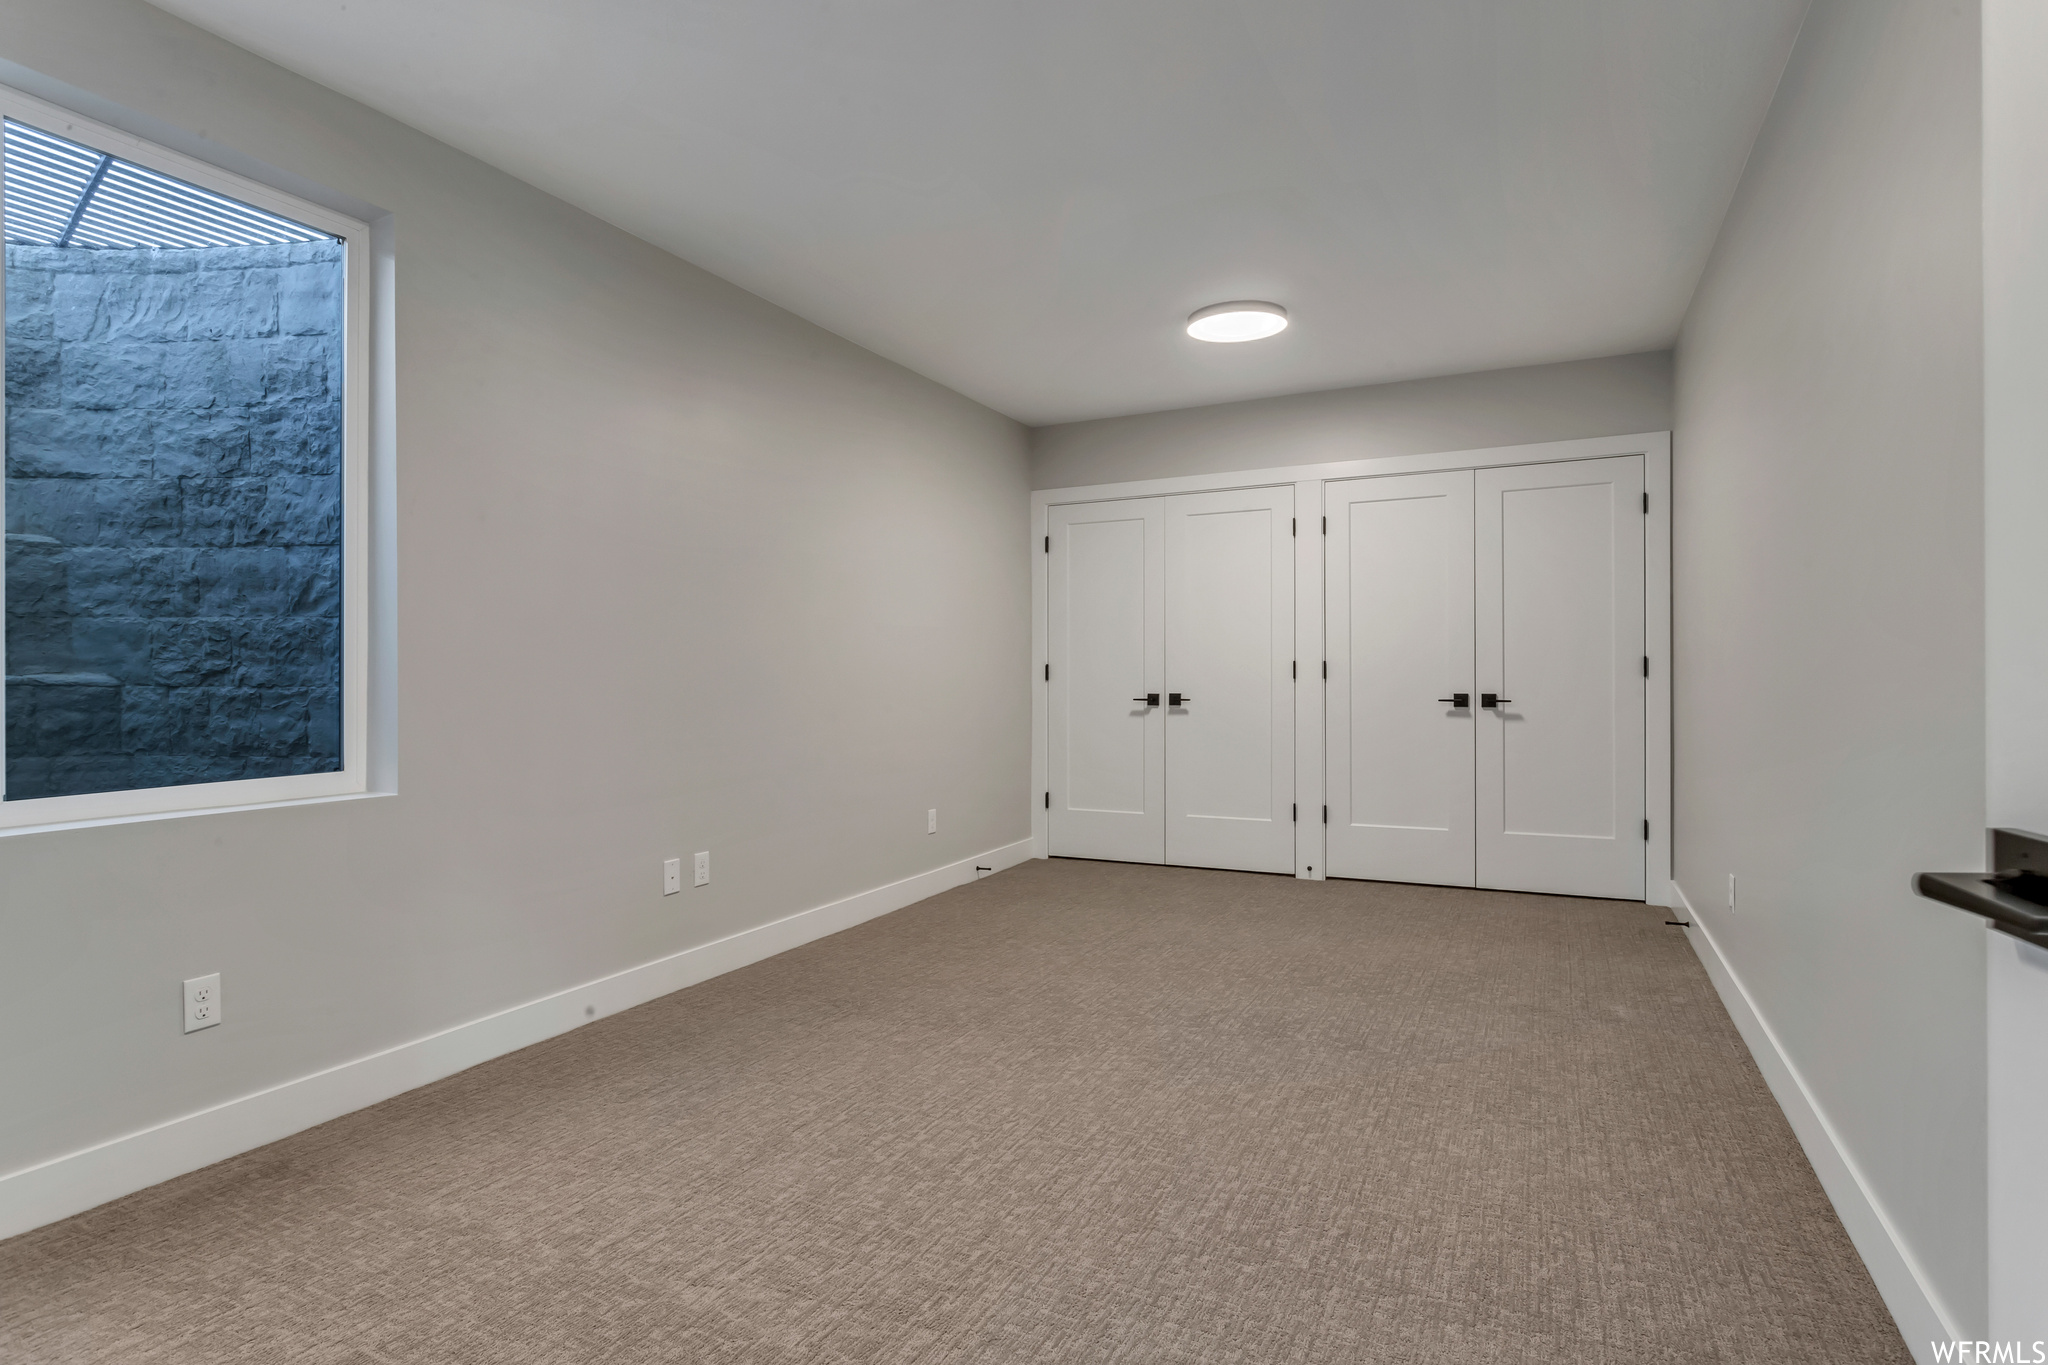 The addition of closets in this room make for a large bedroom or office space